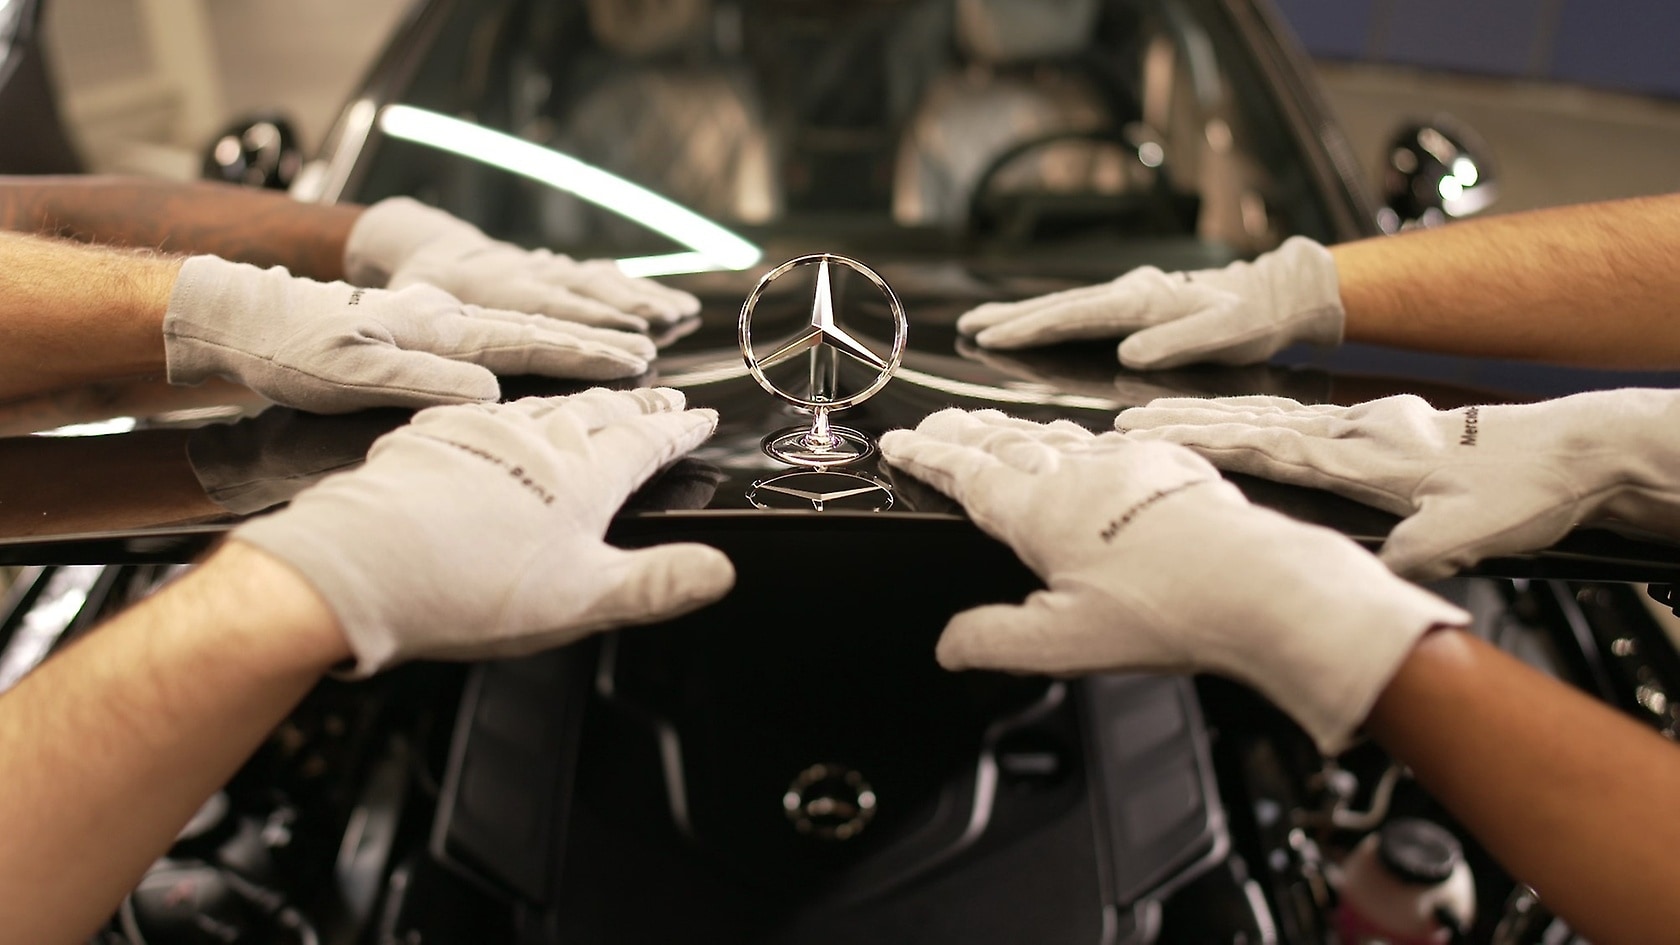 Hands with Mercedes star on the bonnet.